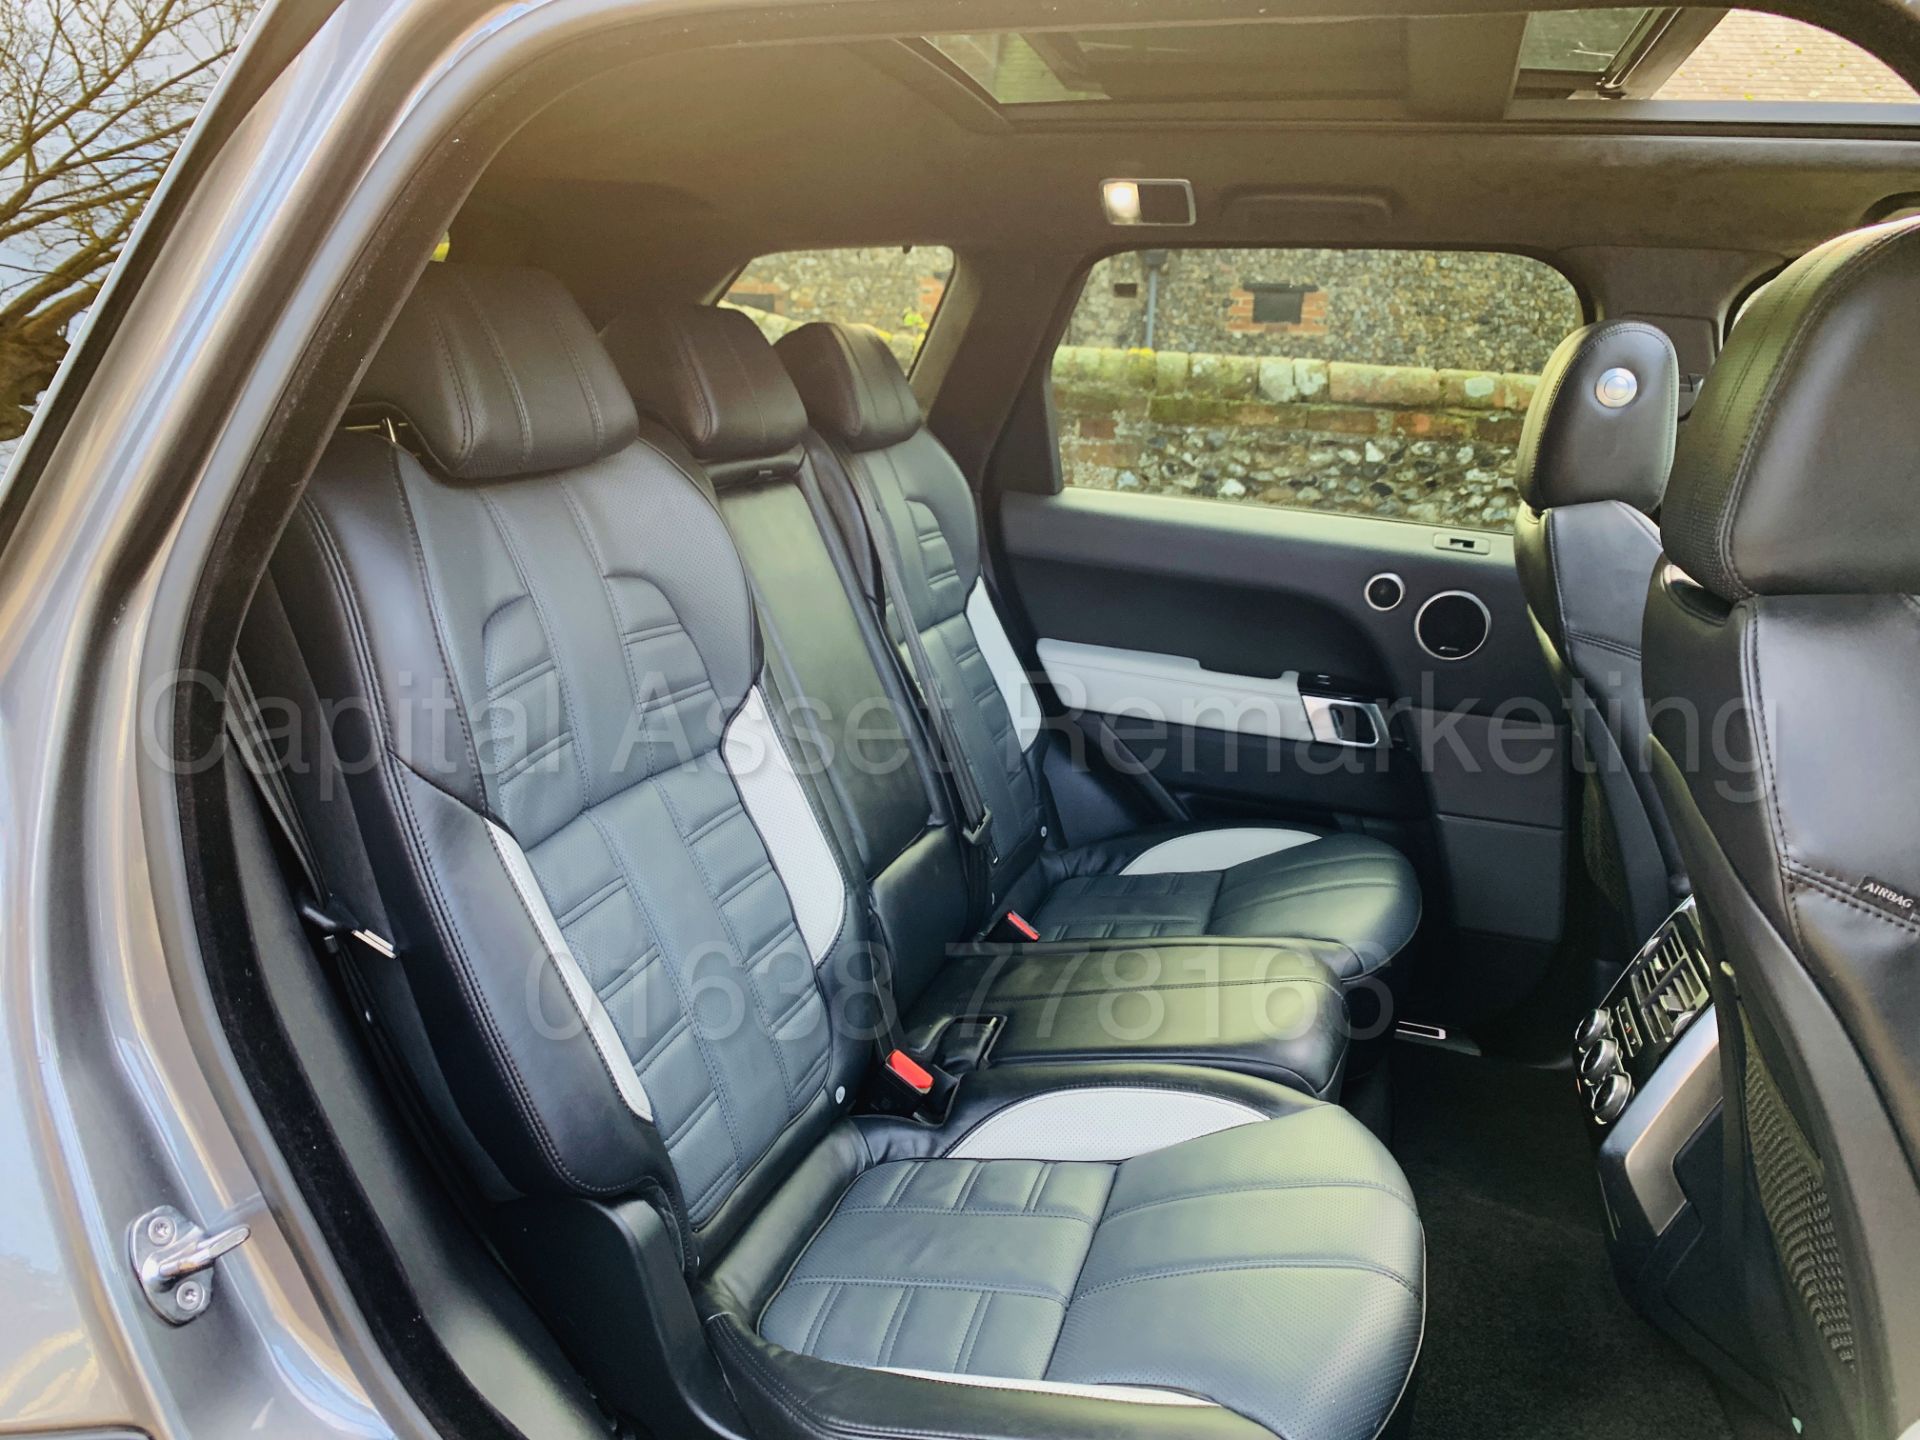 On Sale RANGE ROVER SPORT *AUTOBIOGRAPHY DYNAMIC* (2015 MODEL) '3.0 SDV6 - 8 SPEED AUTO' HIGE SPEC - Image 53 of 85